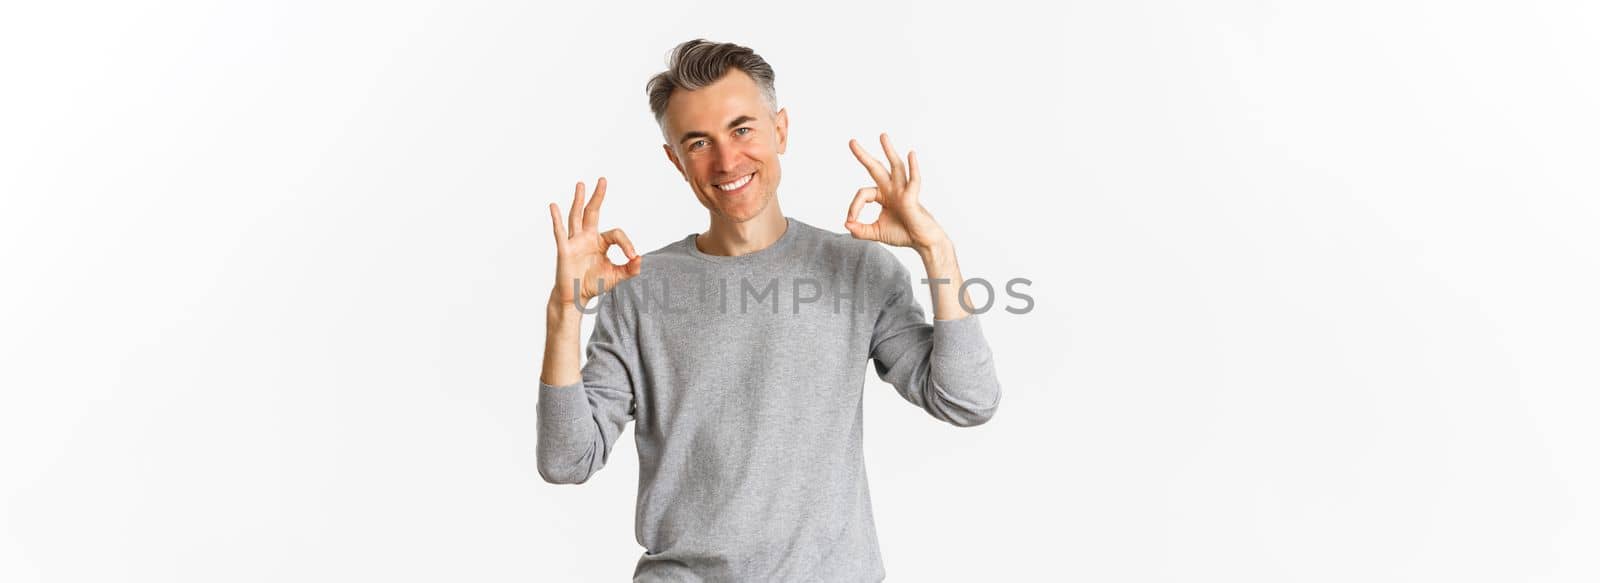 Portrait of successful handsome man in grey sweater, showing okay signs and smiling satisfied, approve something good, recommending product, standing over white background.